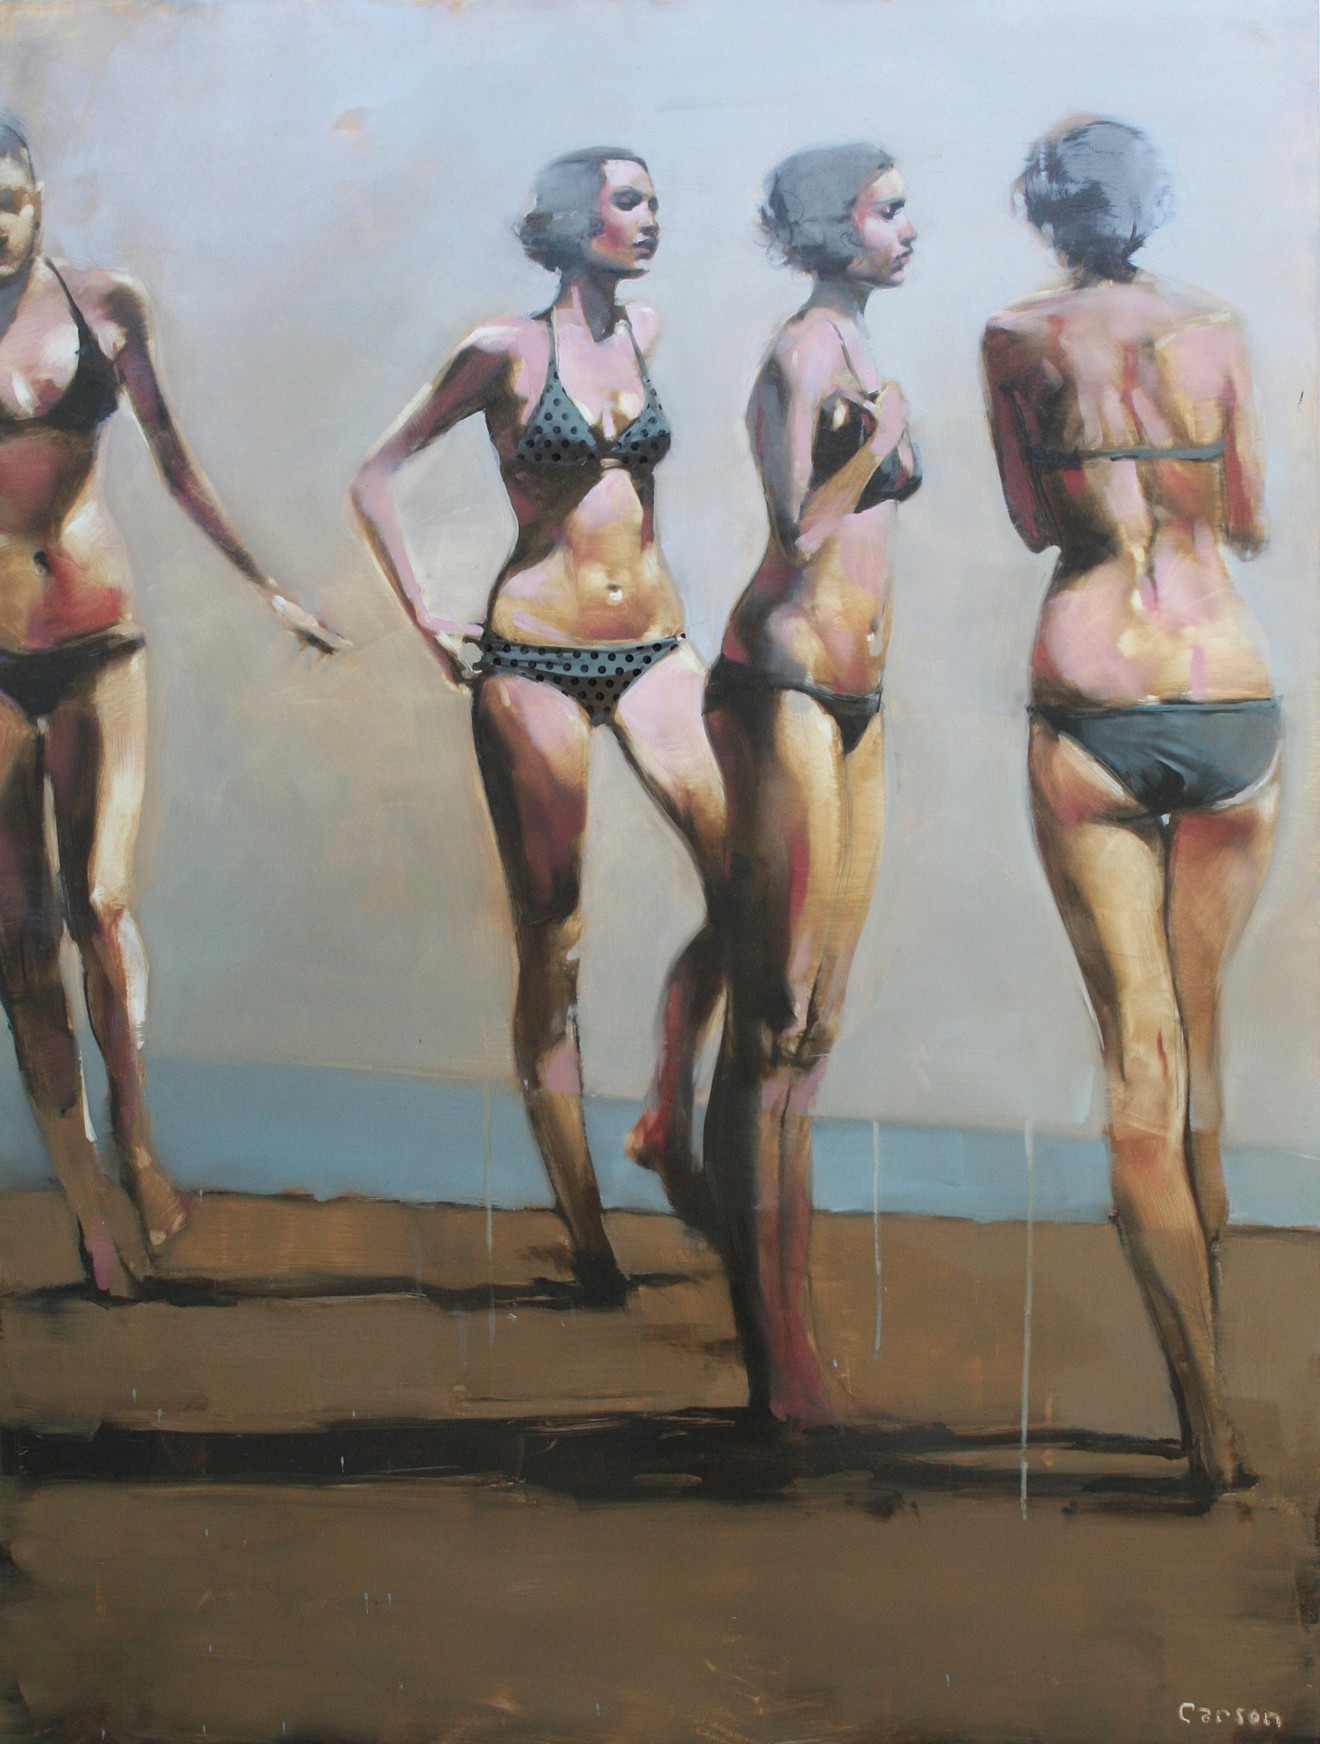 Quartet by Michael Carson is part of “Water, Water Everywhere.”